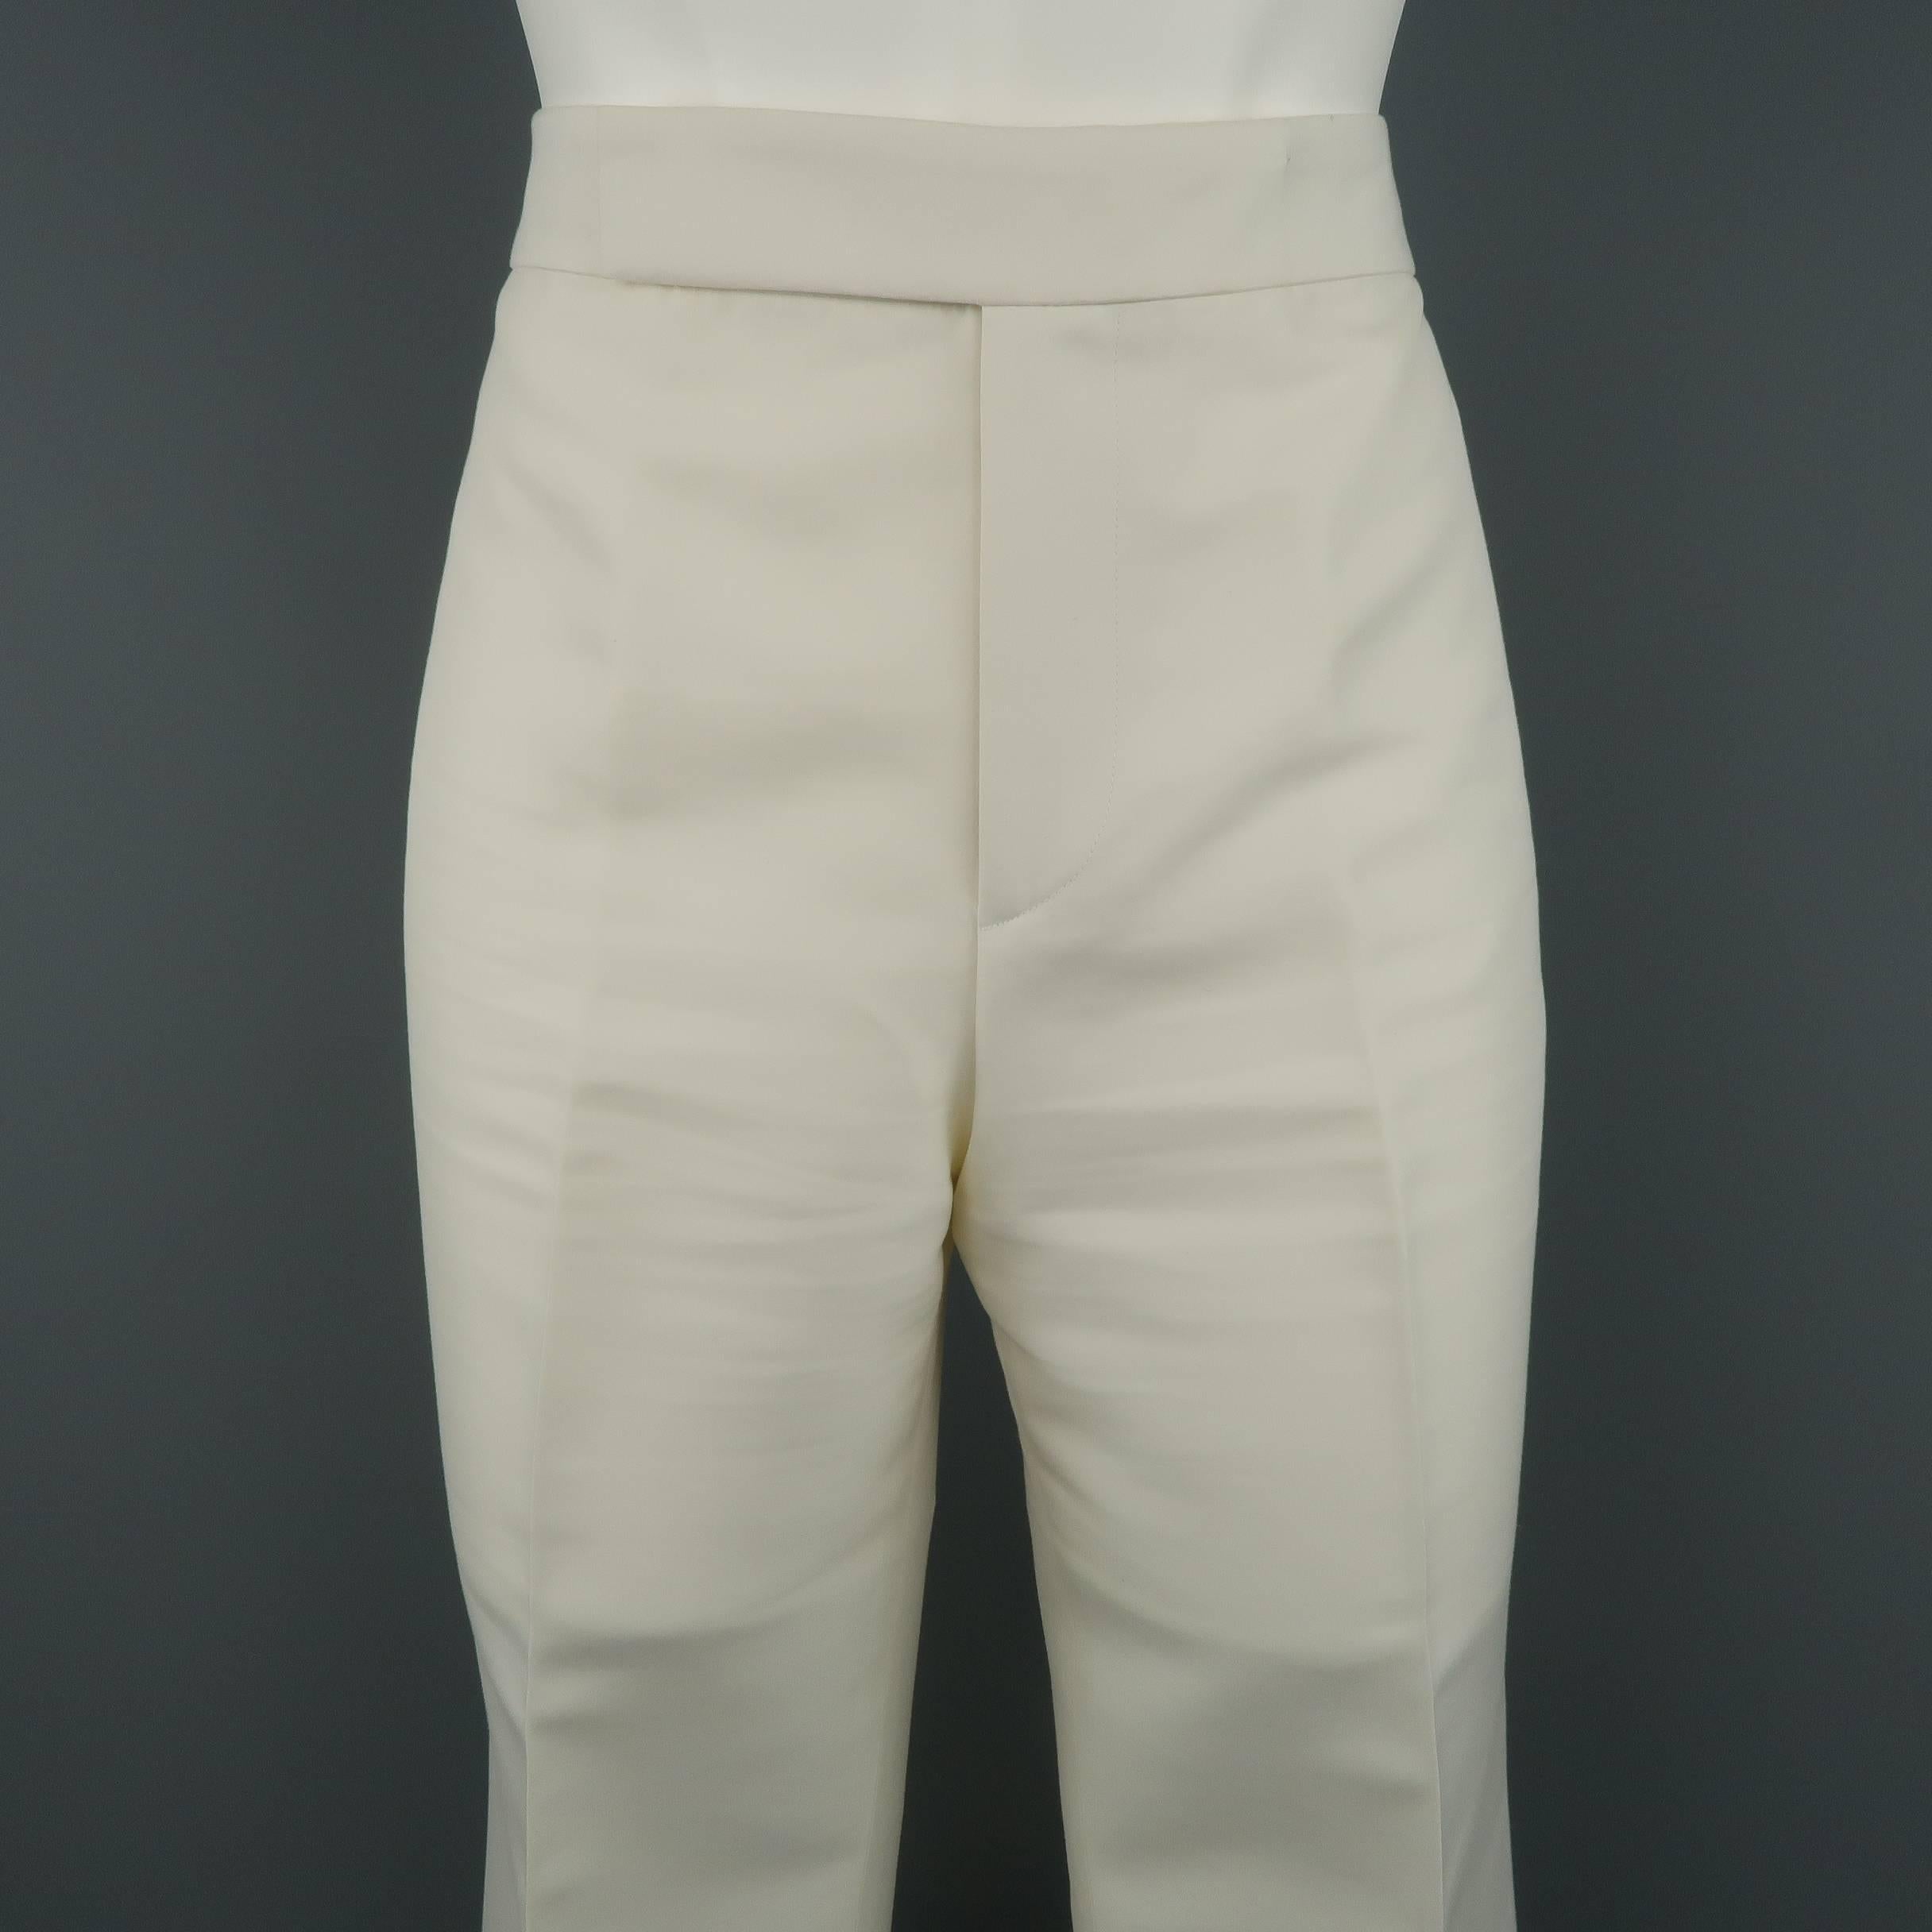 RALPH LAUREN COLLECTION dress pants come in off white cotton silk blend fabric with a hidden closure and flaired bell bottom silhouette. Matching jacket available separately. Imperfections on waistband. As-is. Made in Italy.
 
Good Pre-Owned